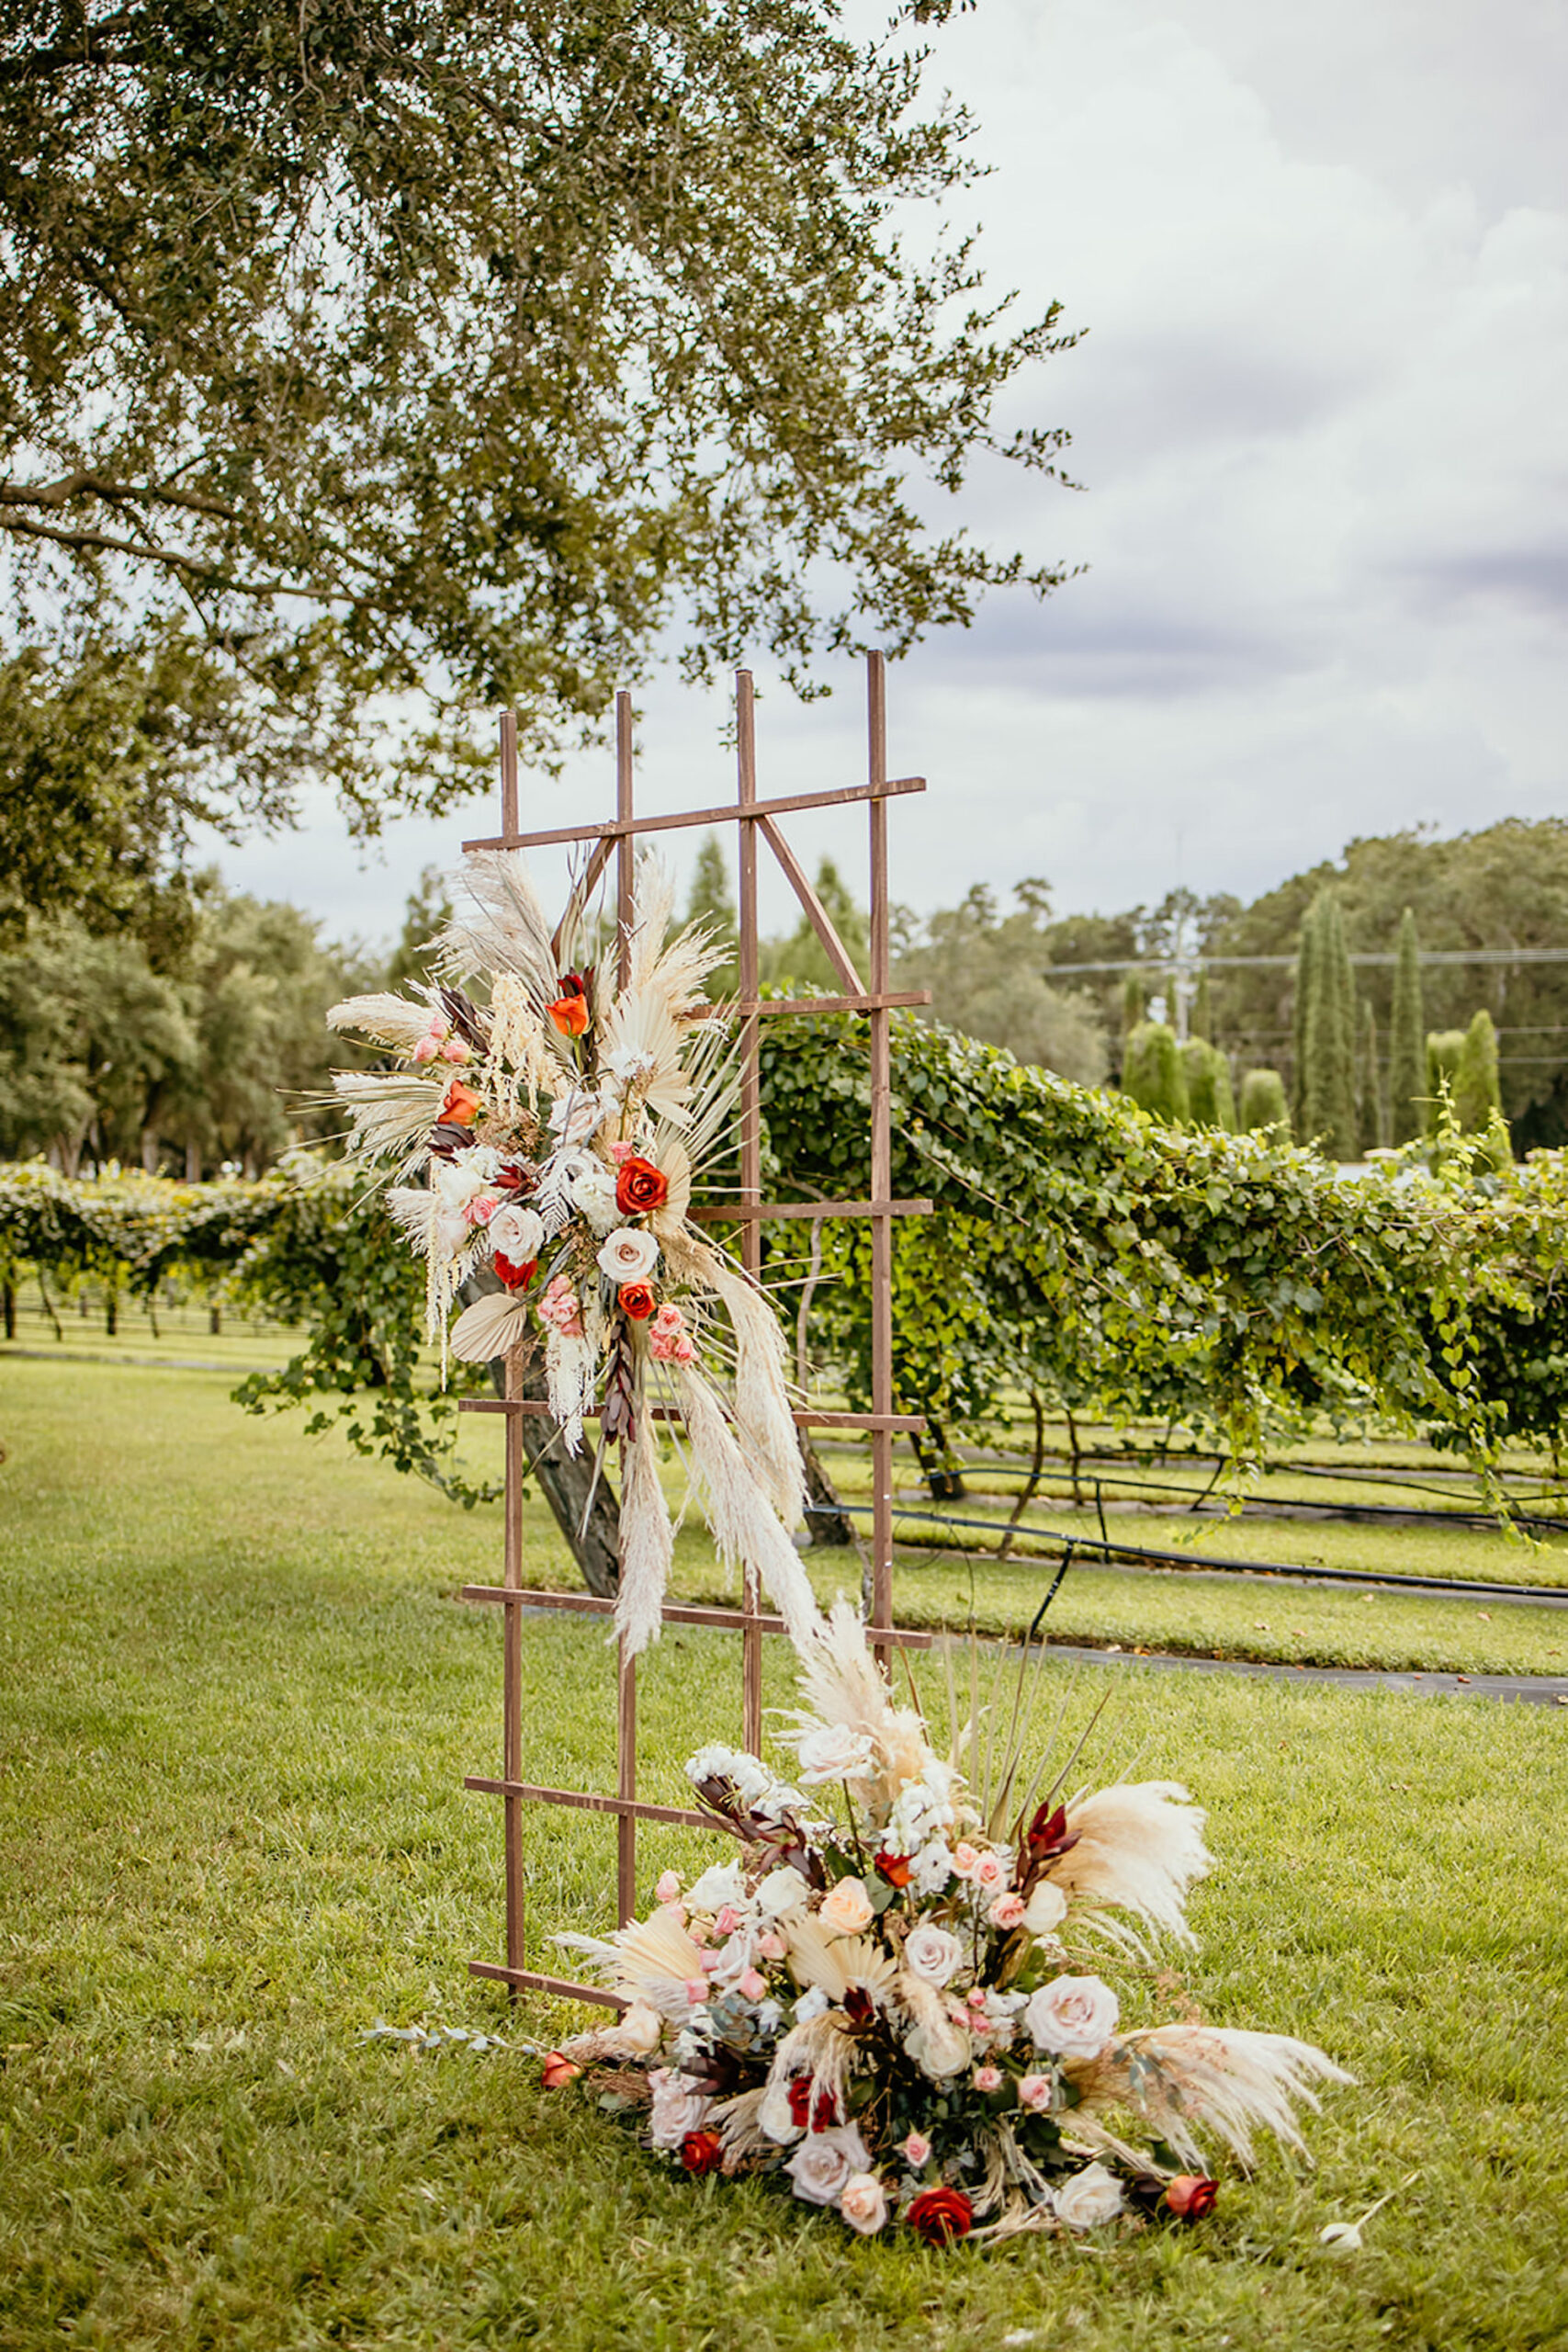 Boho Garden Trellis Flower Arrangements with Palm Fronds, Pampas Grass, Roses, and Greenery Altar Decor Inspiration | Tampa Bay Florist Save the Date Florida